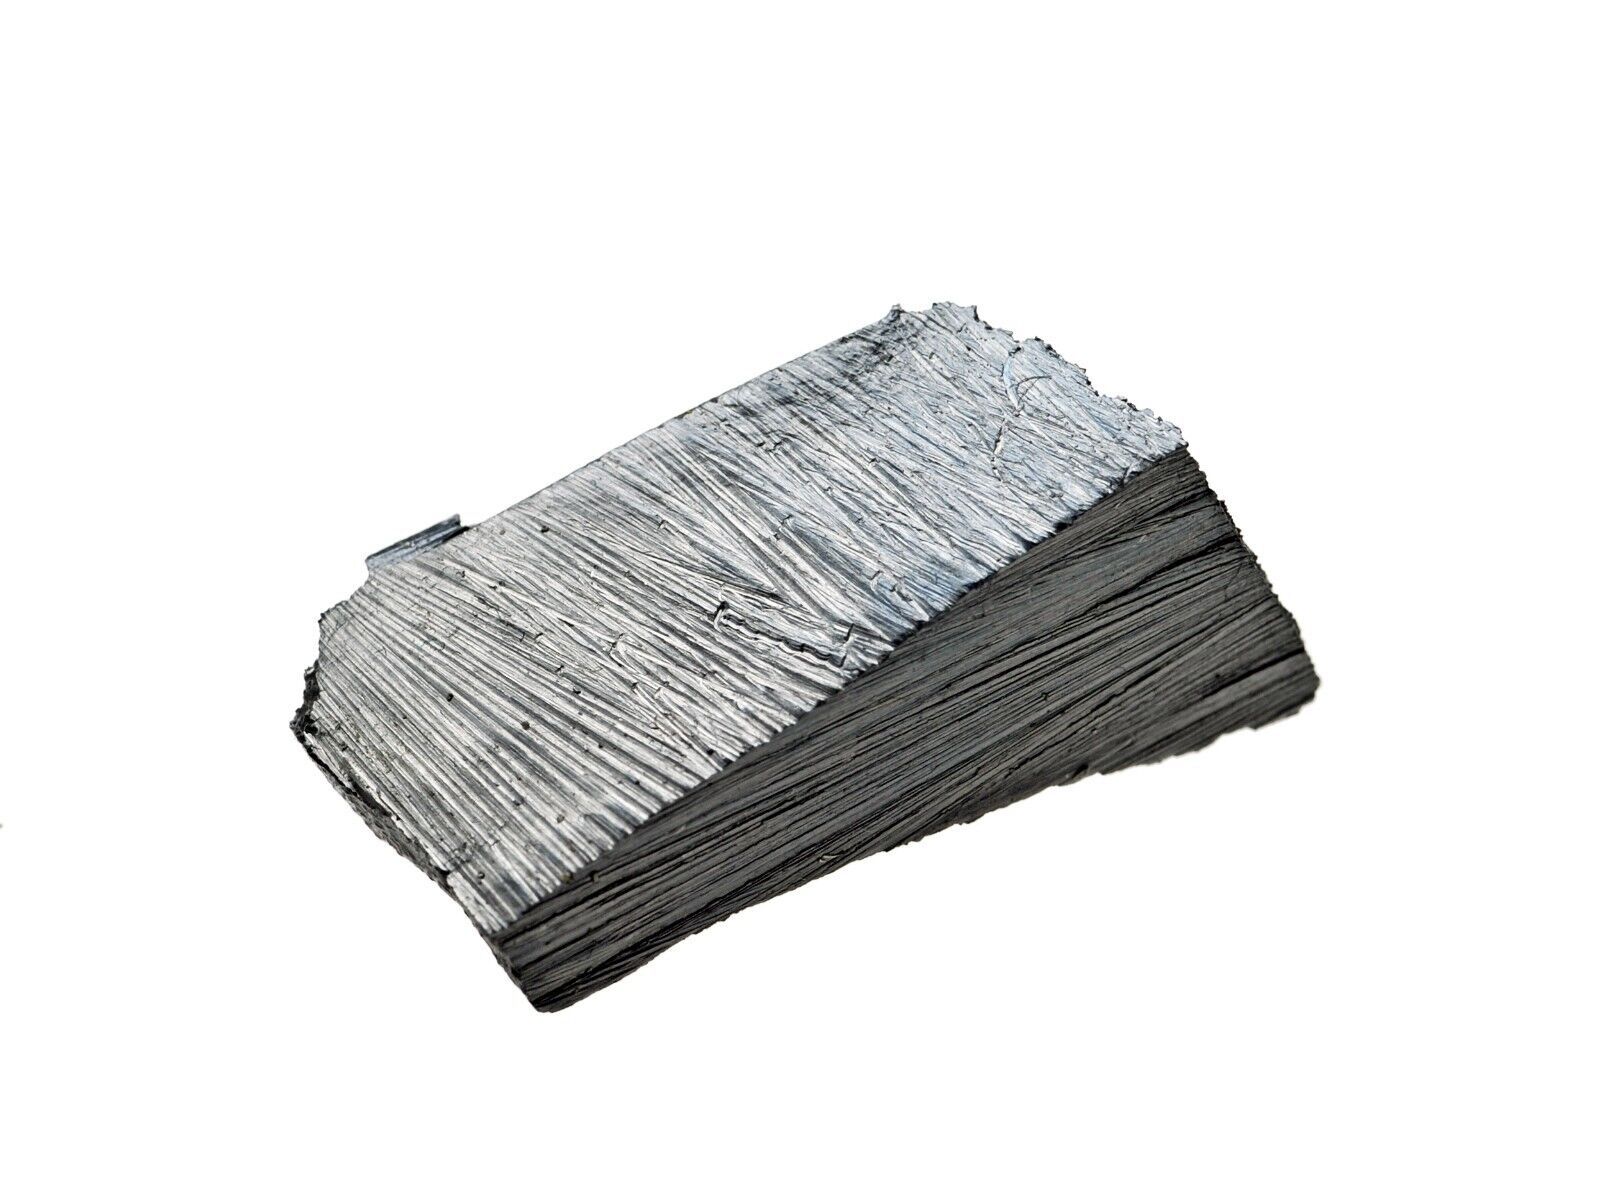 Lanthanum Metal 10 Grams 99.7% for Element Collection USA SHIPPING